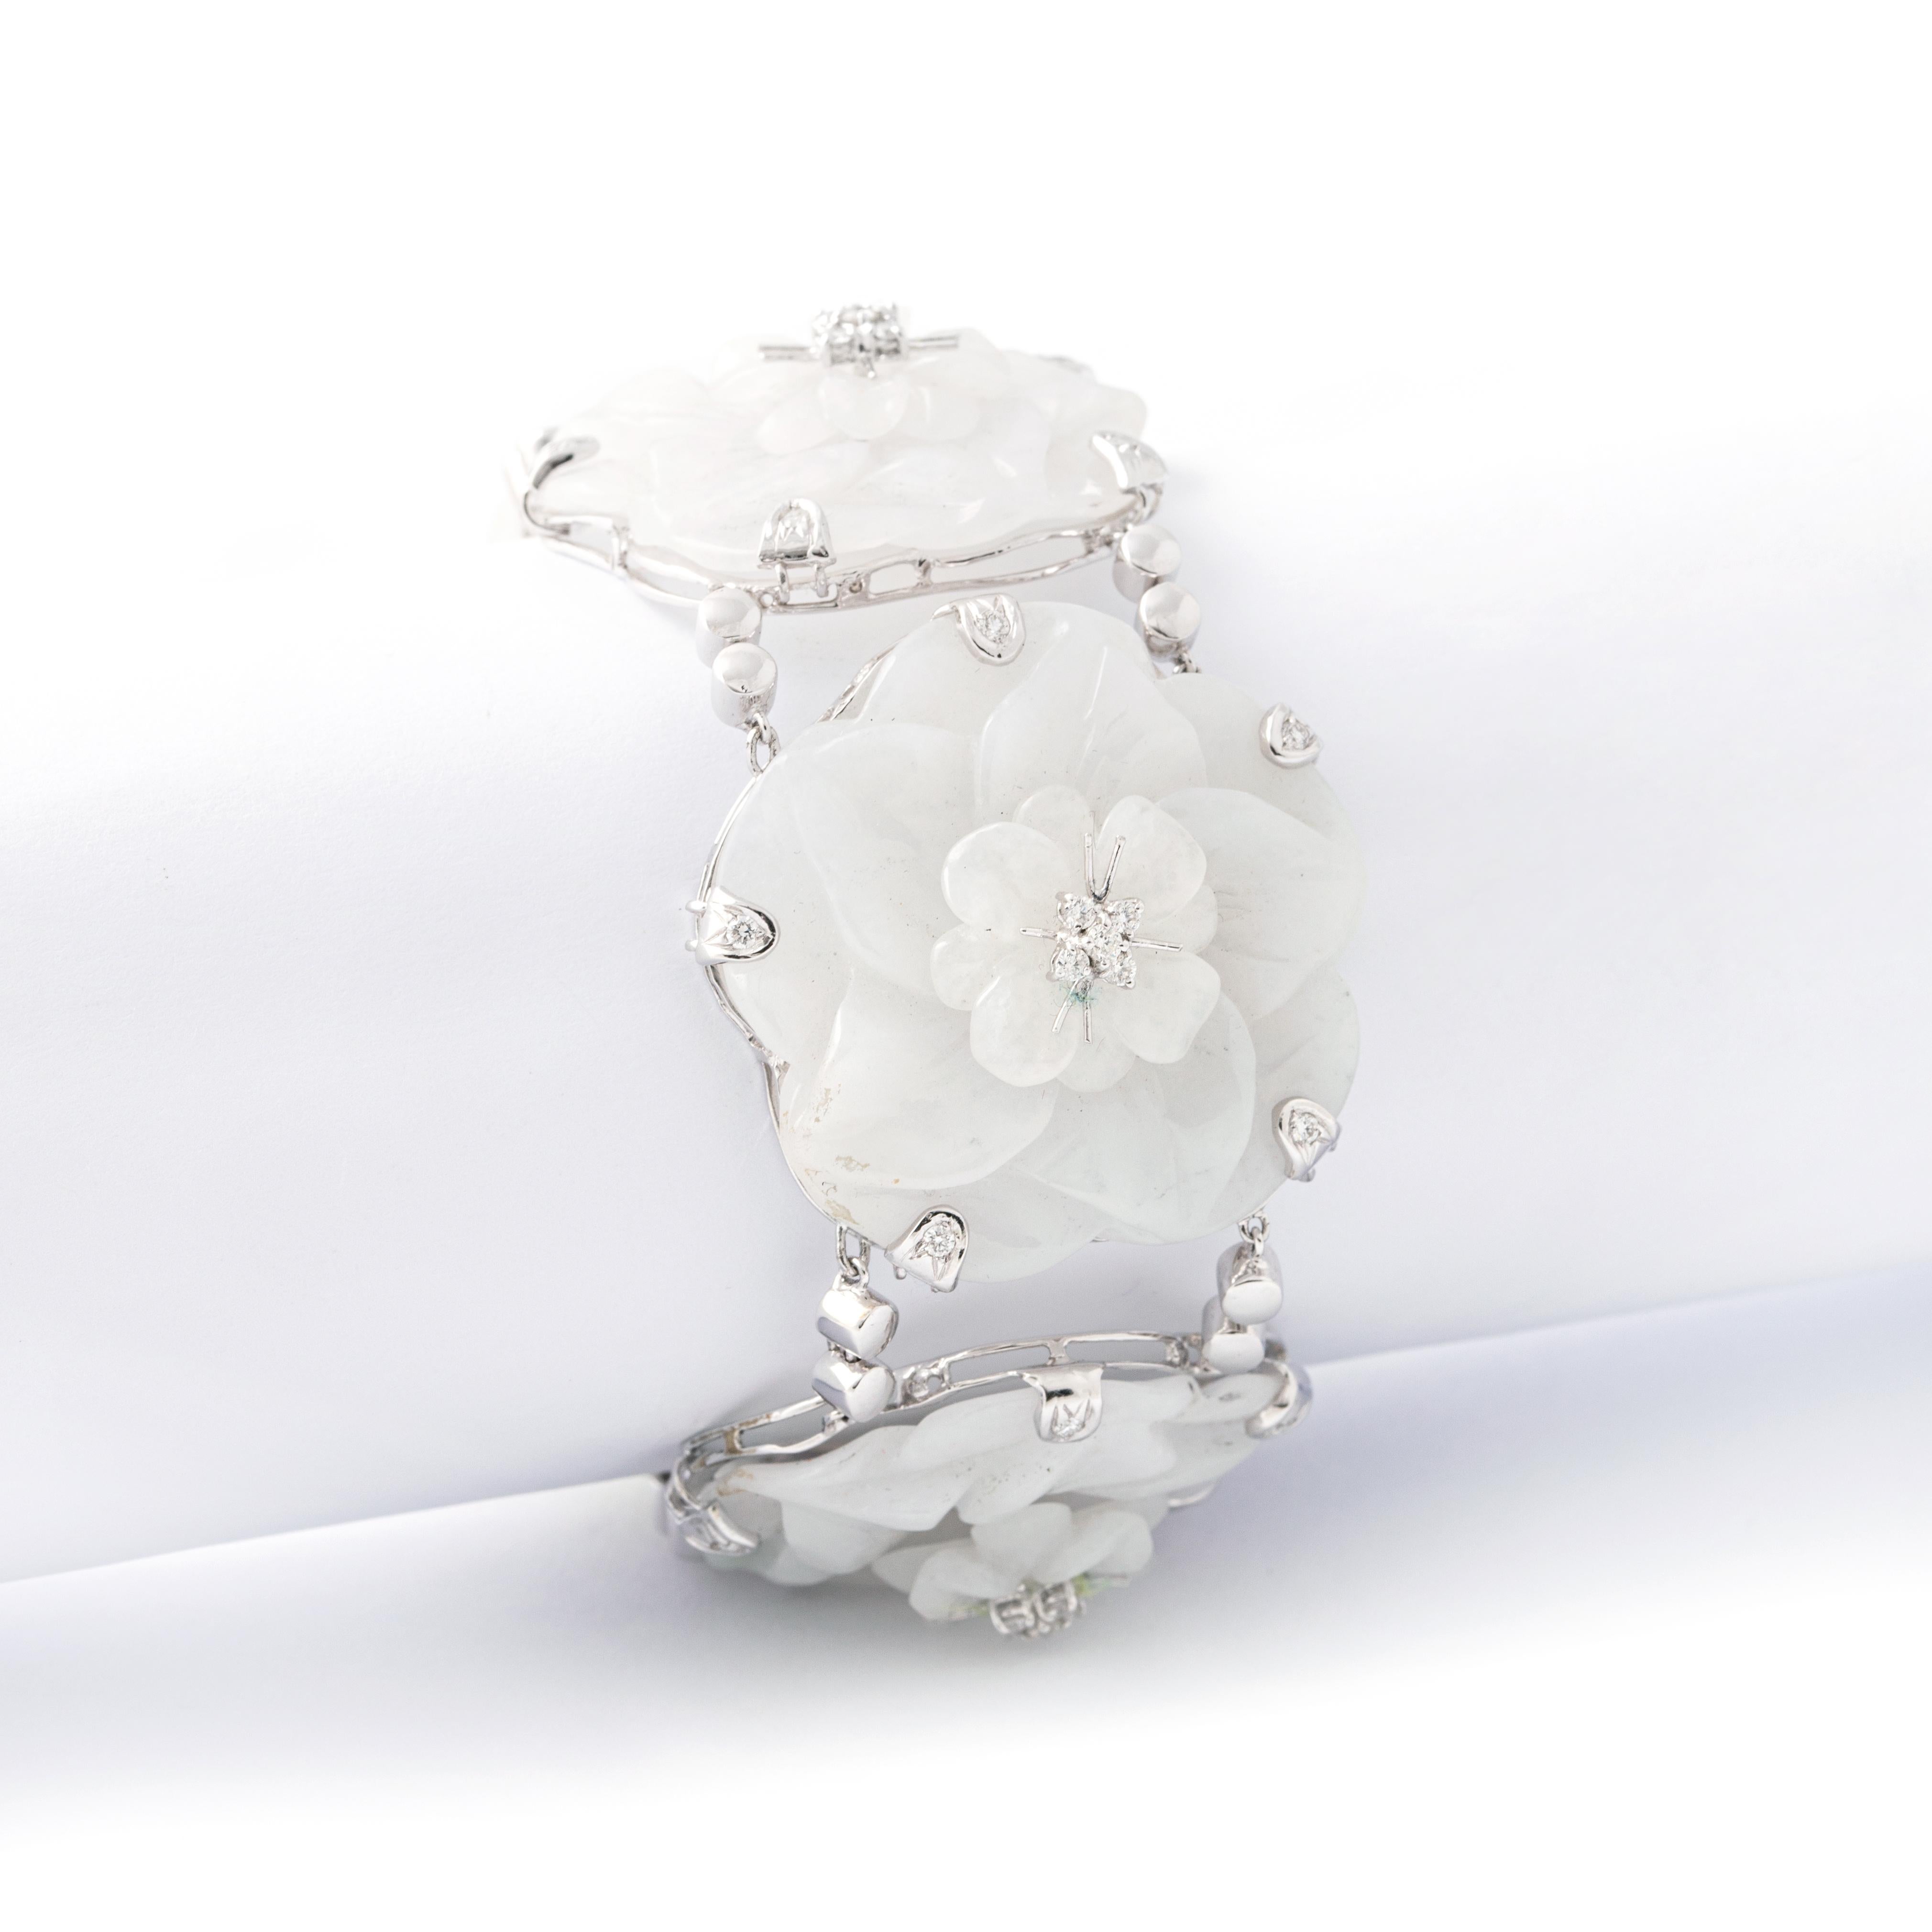 Flower Diamond, probably white jade (not tested) on white gold bracelet. Contemporary work.

Total length: approx. 19.00 centimeters.
Width: approx. 3.30 centimeters.
Total weight: 82.95 grams.